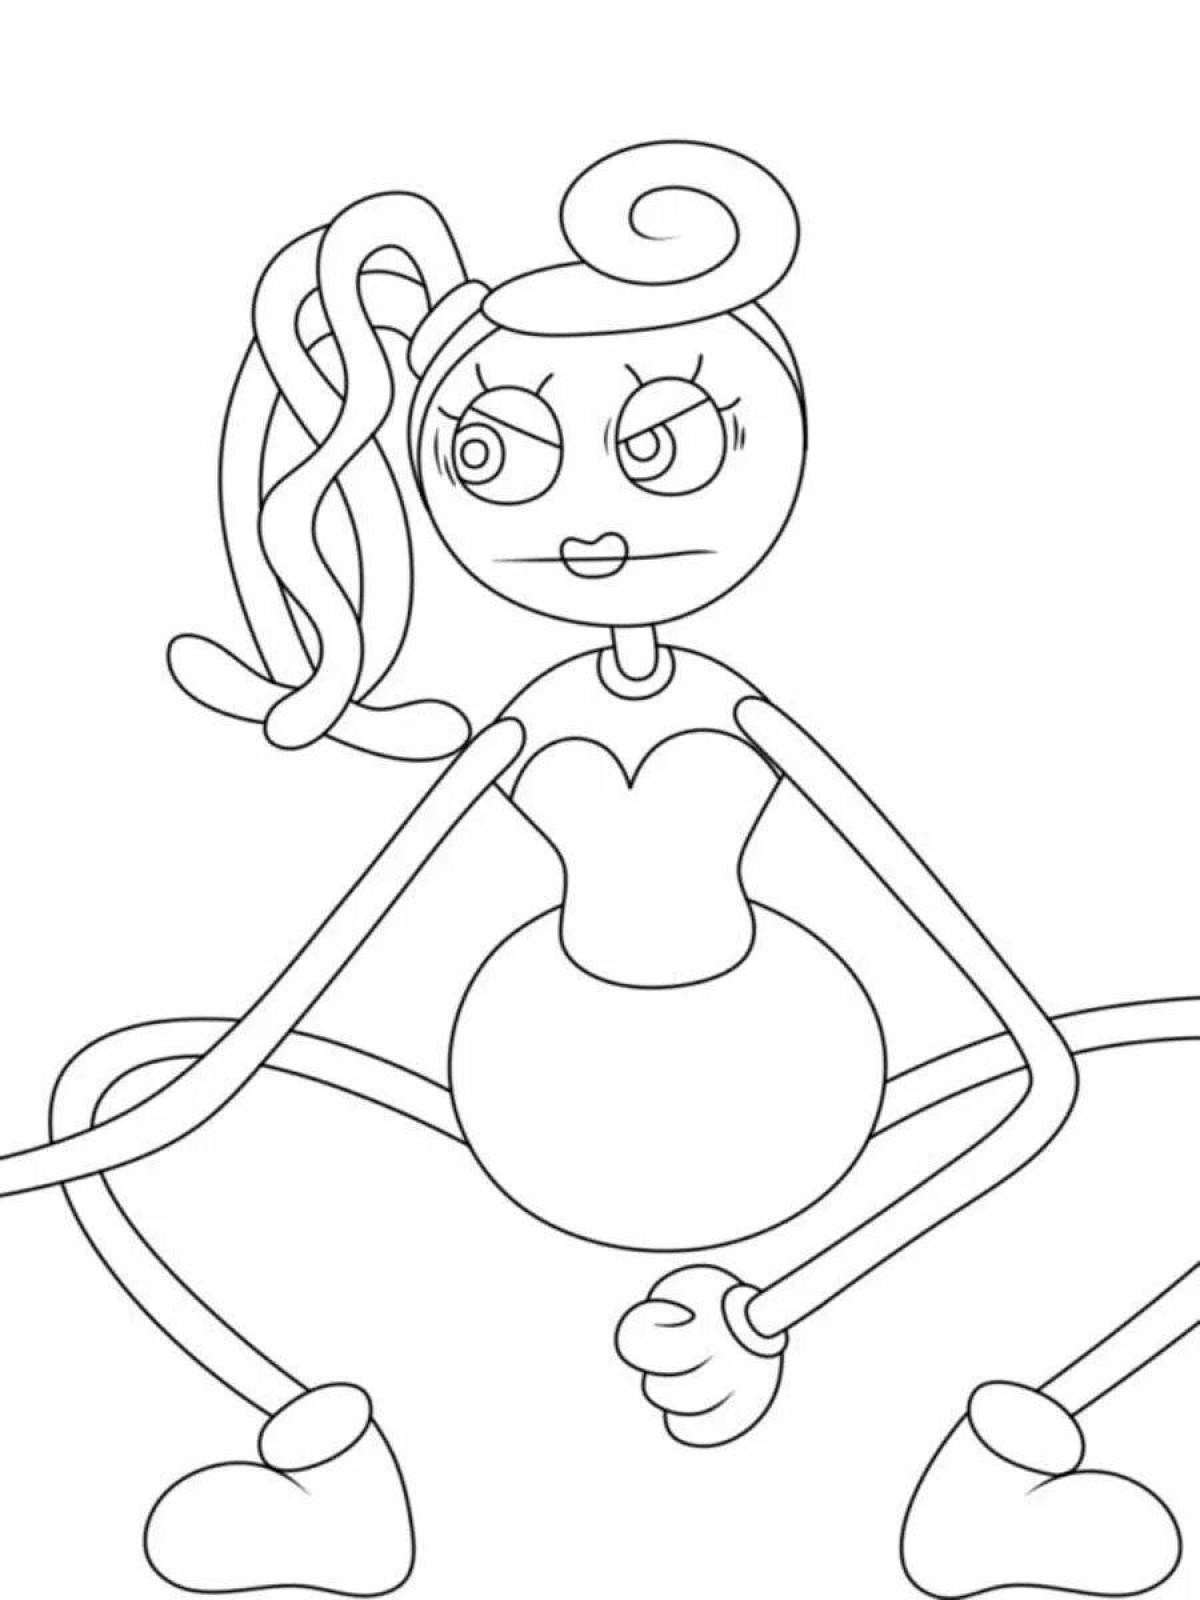 Colorful mami leggy coloring page